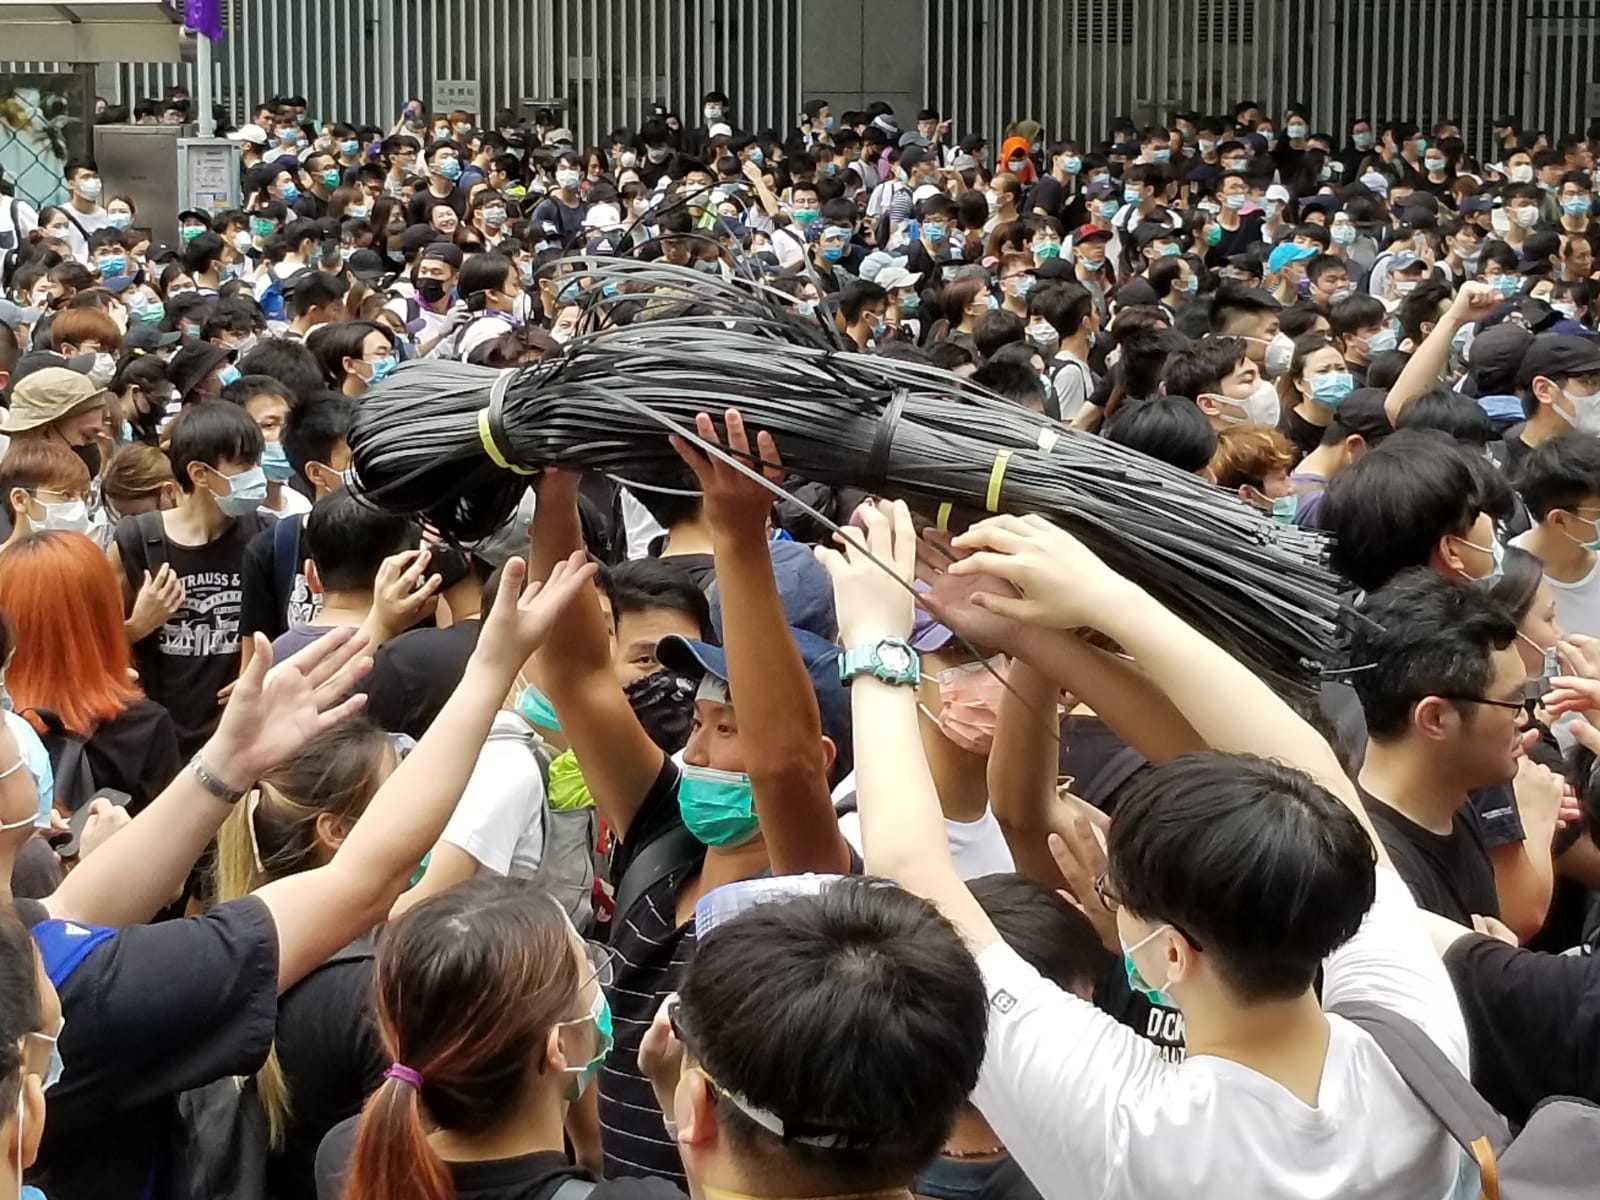 Protesters could be heard shouting for gloves, goggles, and zip ties — used to create makeshift ramparts by tying together police barricades. Cheers were let out as supplies passed through the crowd. Photo: Coconuts Hong Kong